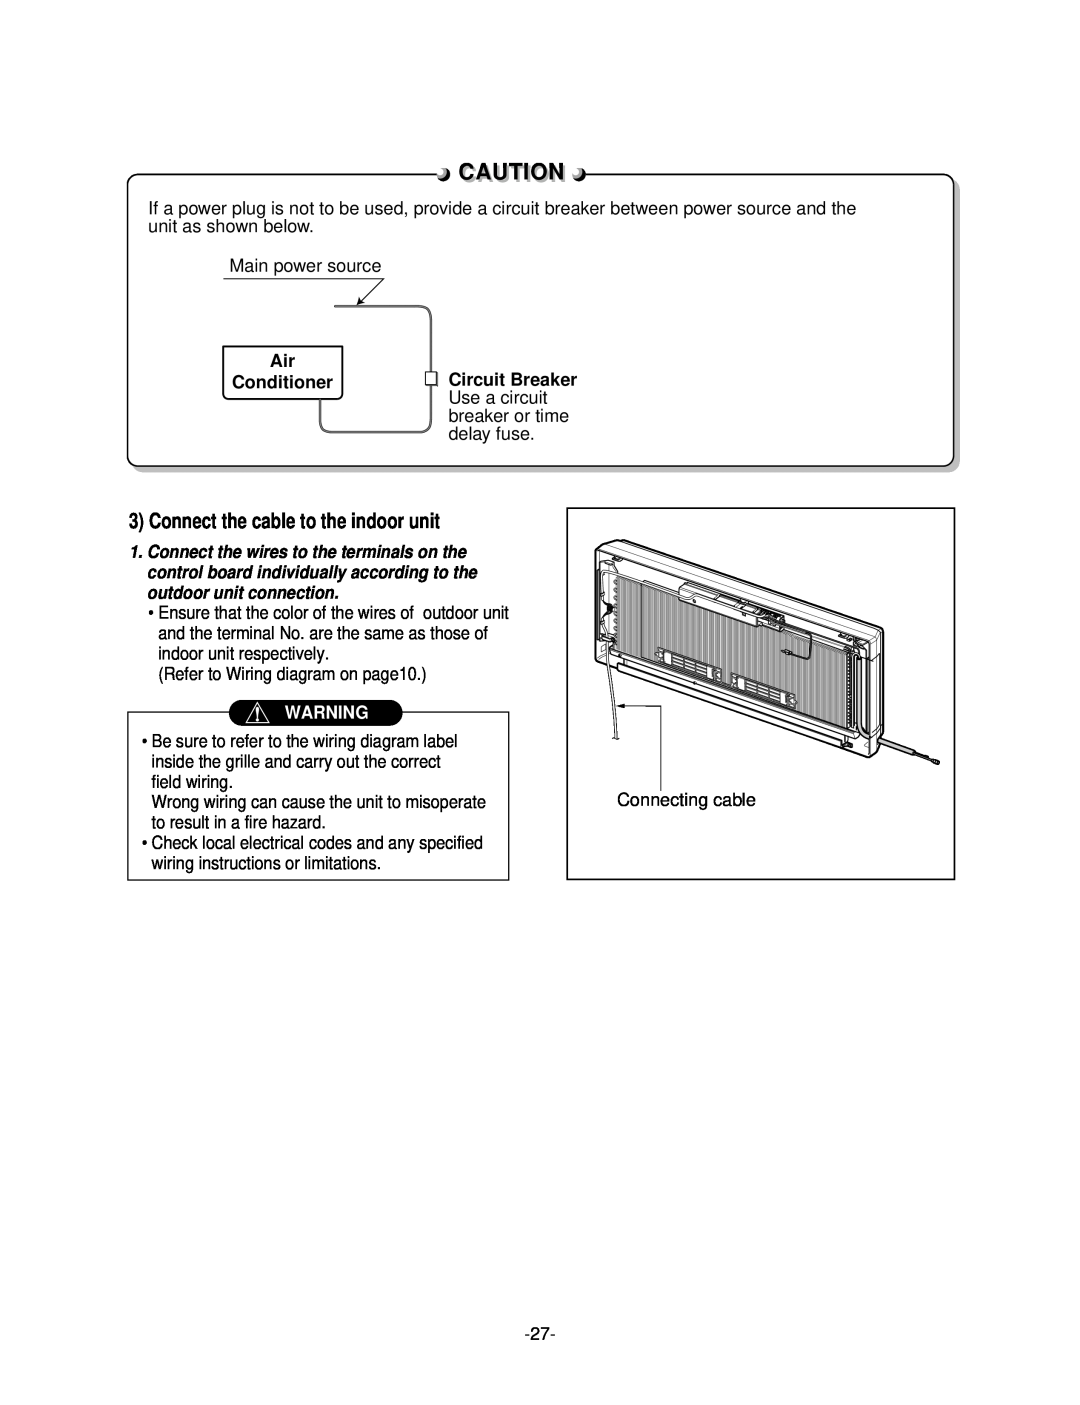 LG Electronics LSC183VMA service manual Connect the cable to the indoor unit, Air Conditioner, Cautioni 